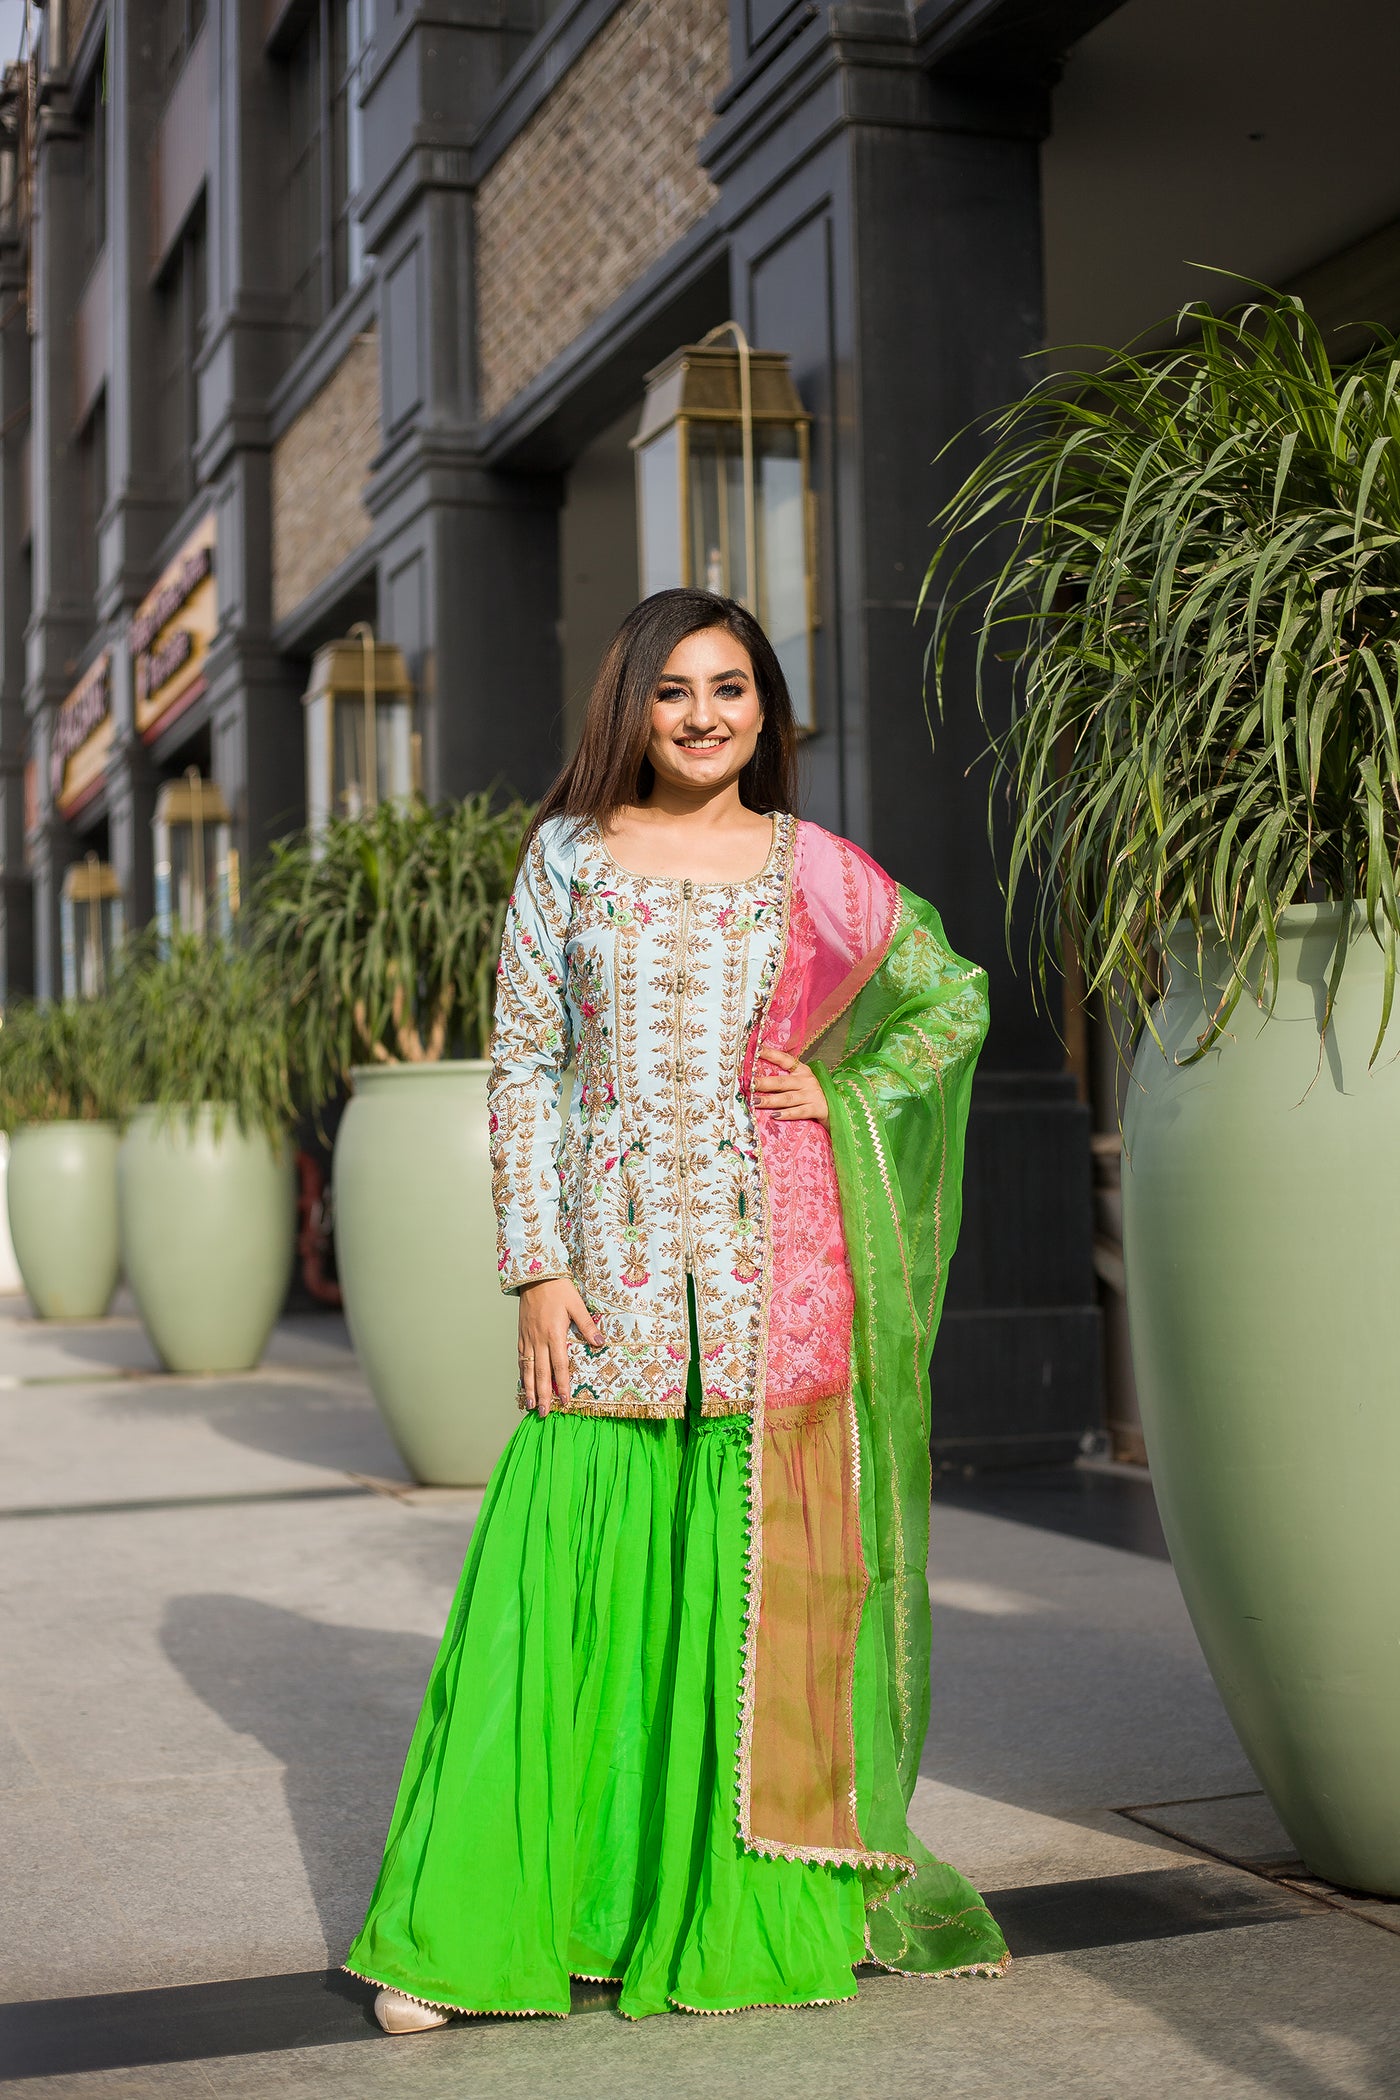 Jewel Sequined Gray-Lime Sharara Set Indian Clothing in Denver, CO, Aurora, CO, Boulder, CO, Fort Collins, CO, Colorado Springs, CO, Parker, CO, Highlands Ranch, CO, Cherry Creek, CO, Centennial, CO, and Longmont, CO. NATIONWIDE SHIPPING USA- India Fashion X